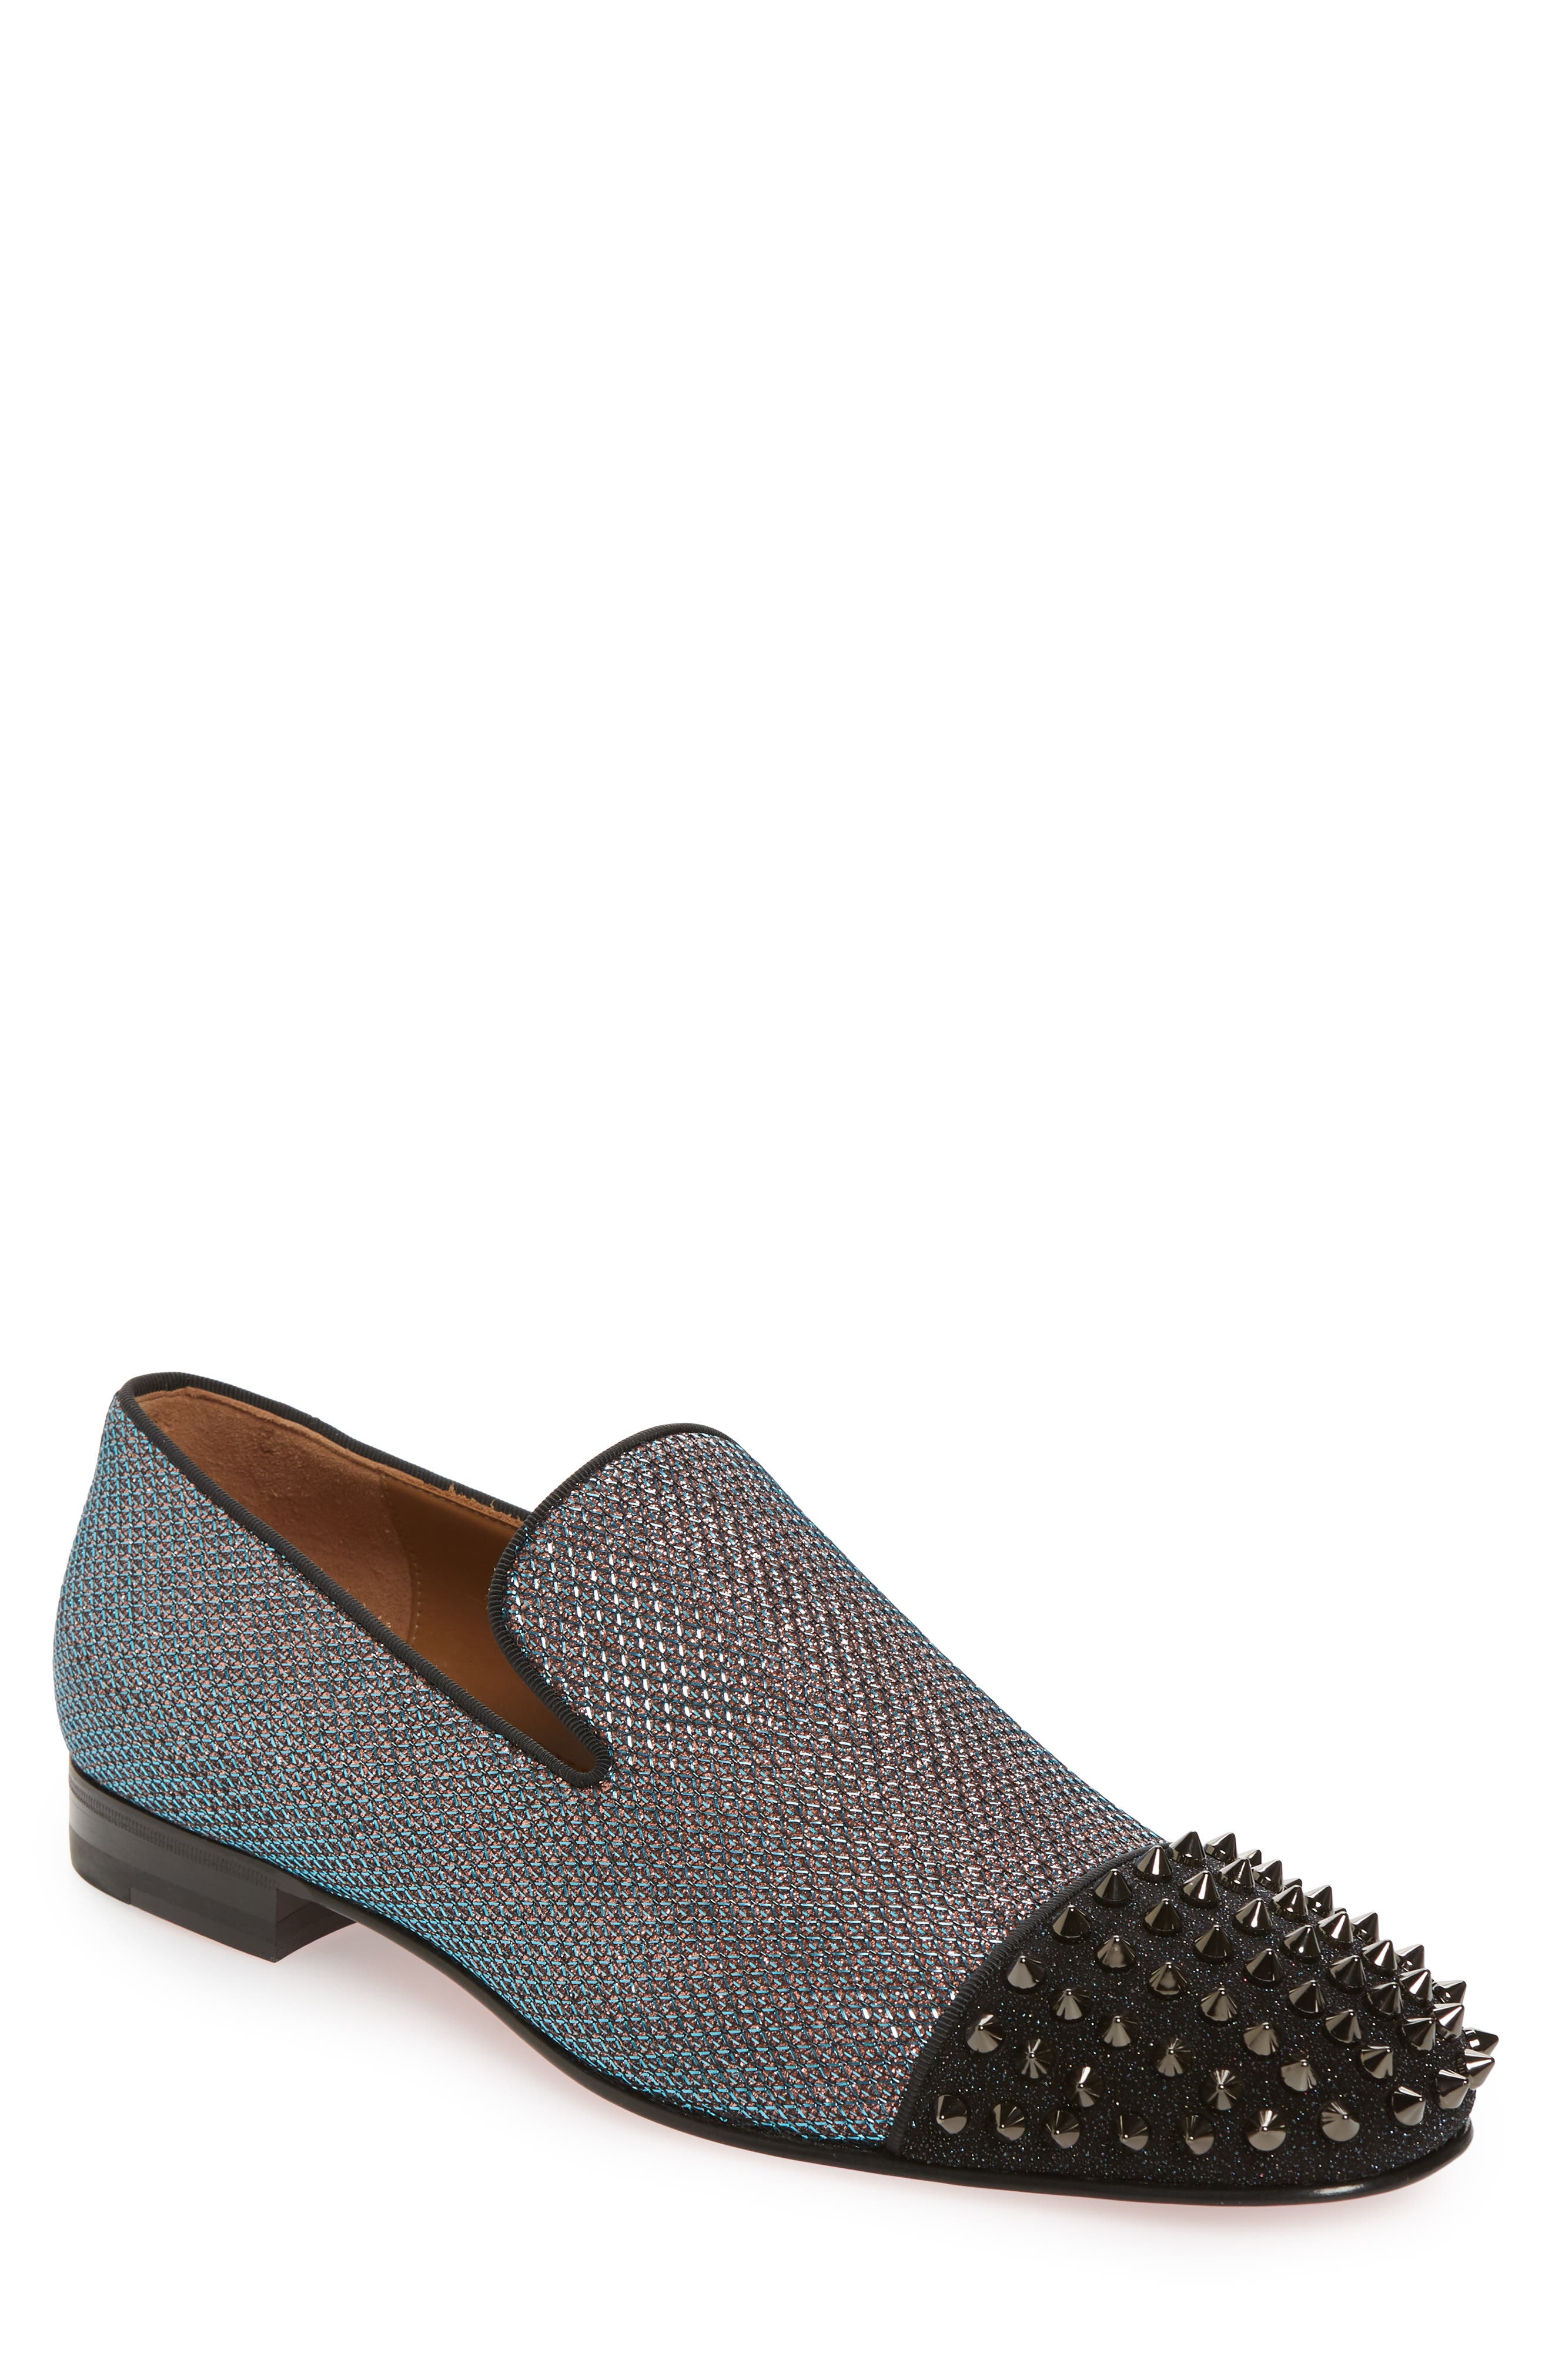 grey spiked loafers